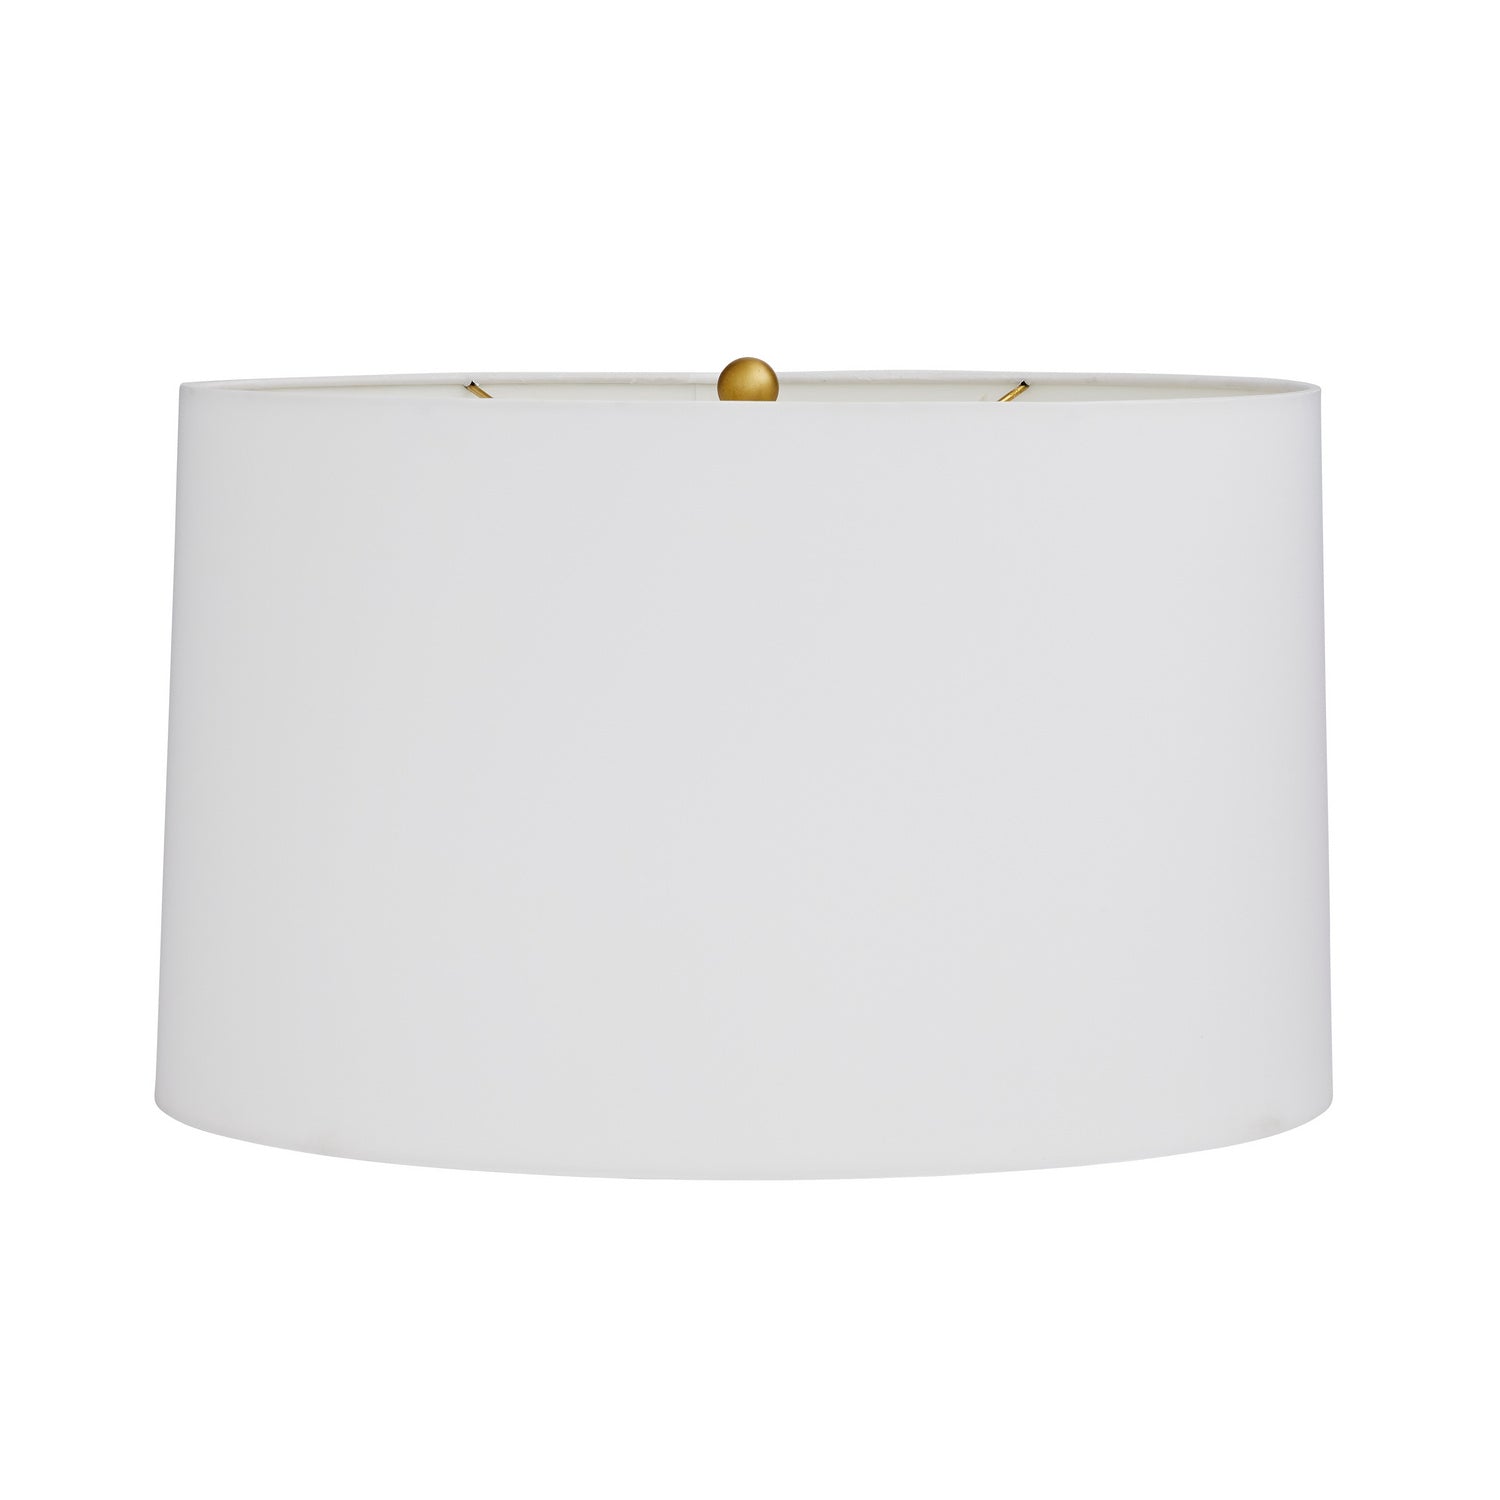 One Light Lamp from the Harleen collection in White finish